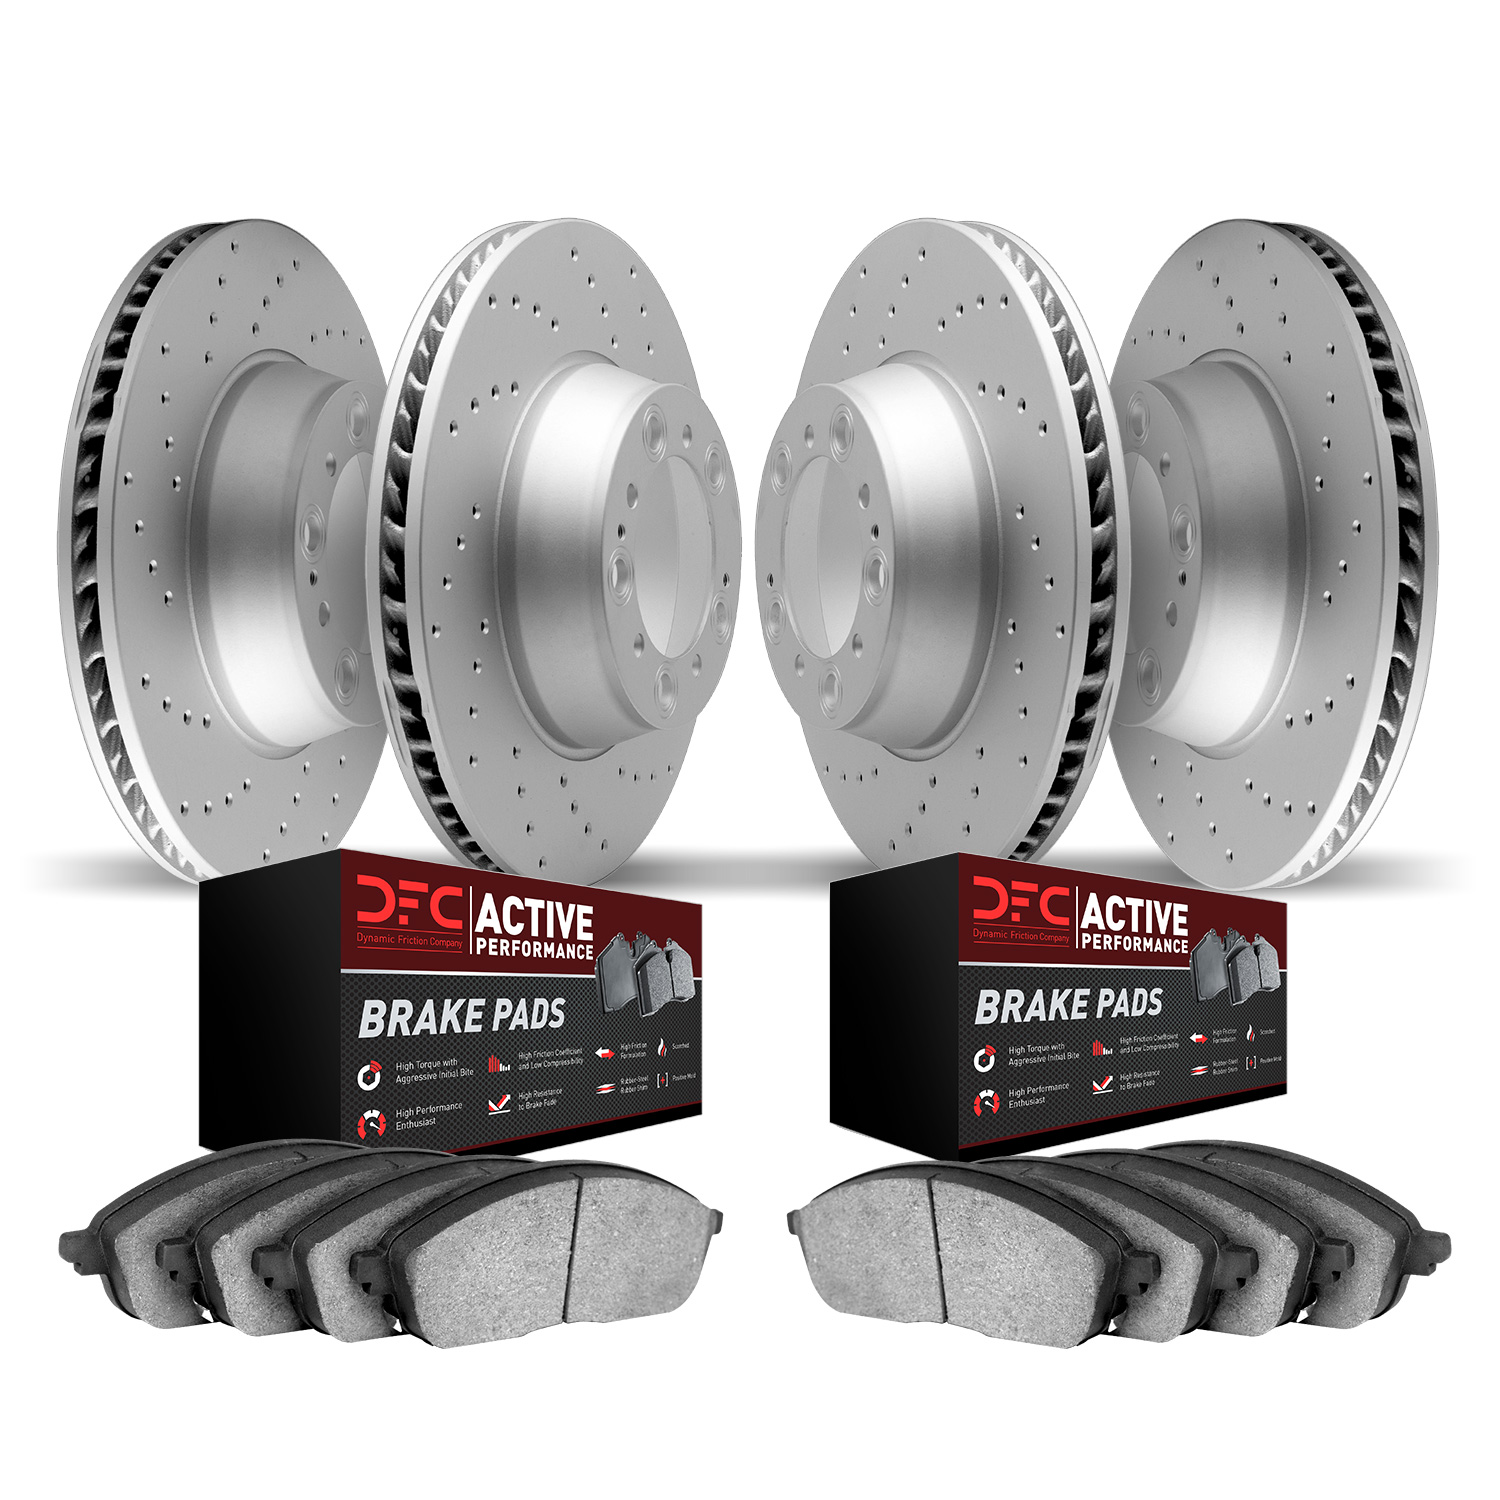 2704-26000 Geoperformance Drilled Brake Rotors with Active Performance Pads Kit, 2014-2020 Tesla, Position: Front and Rear